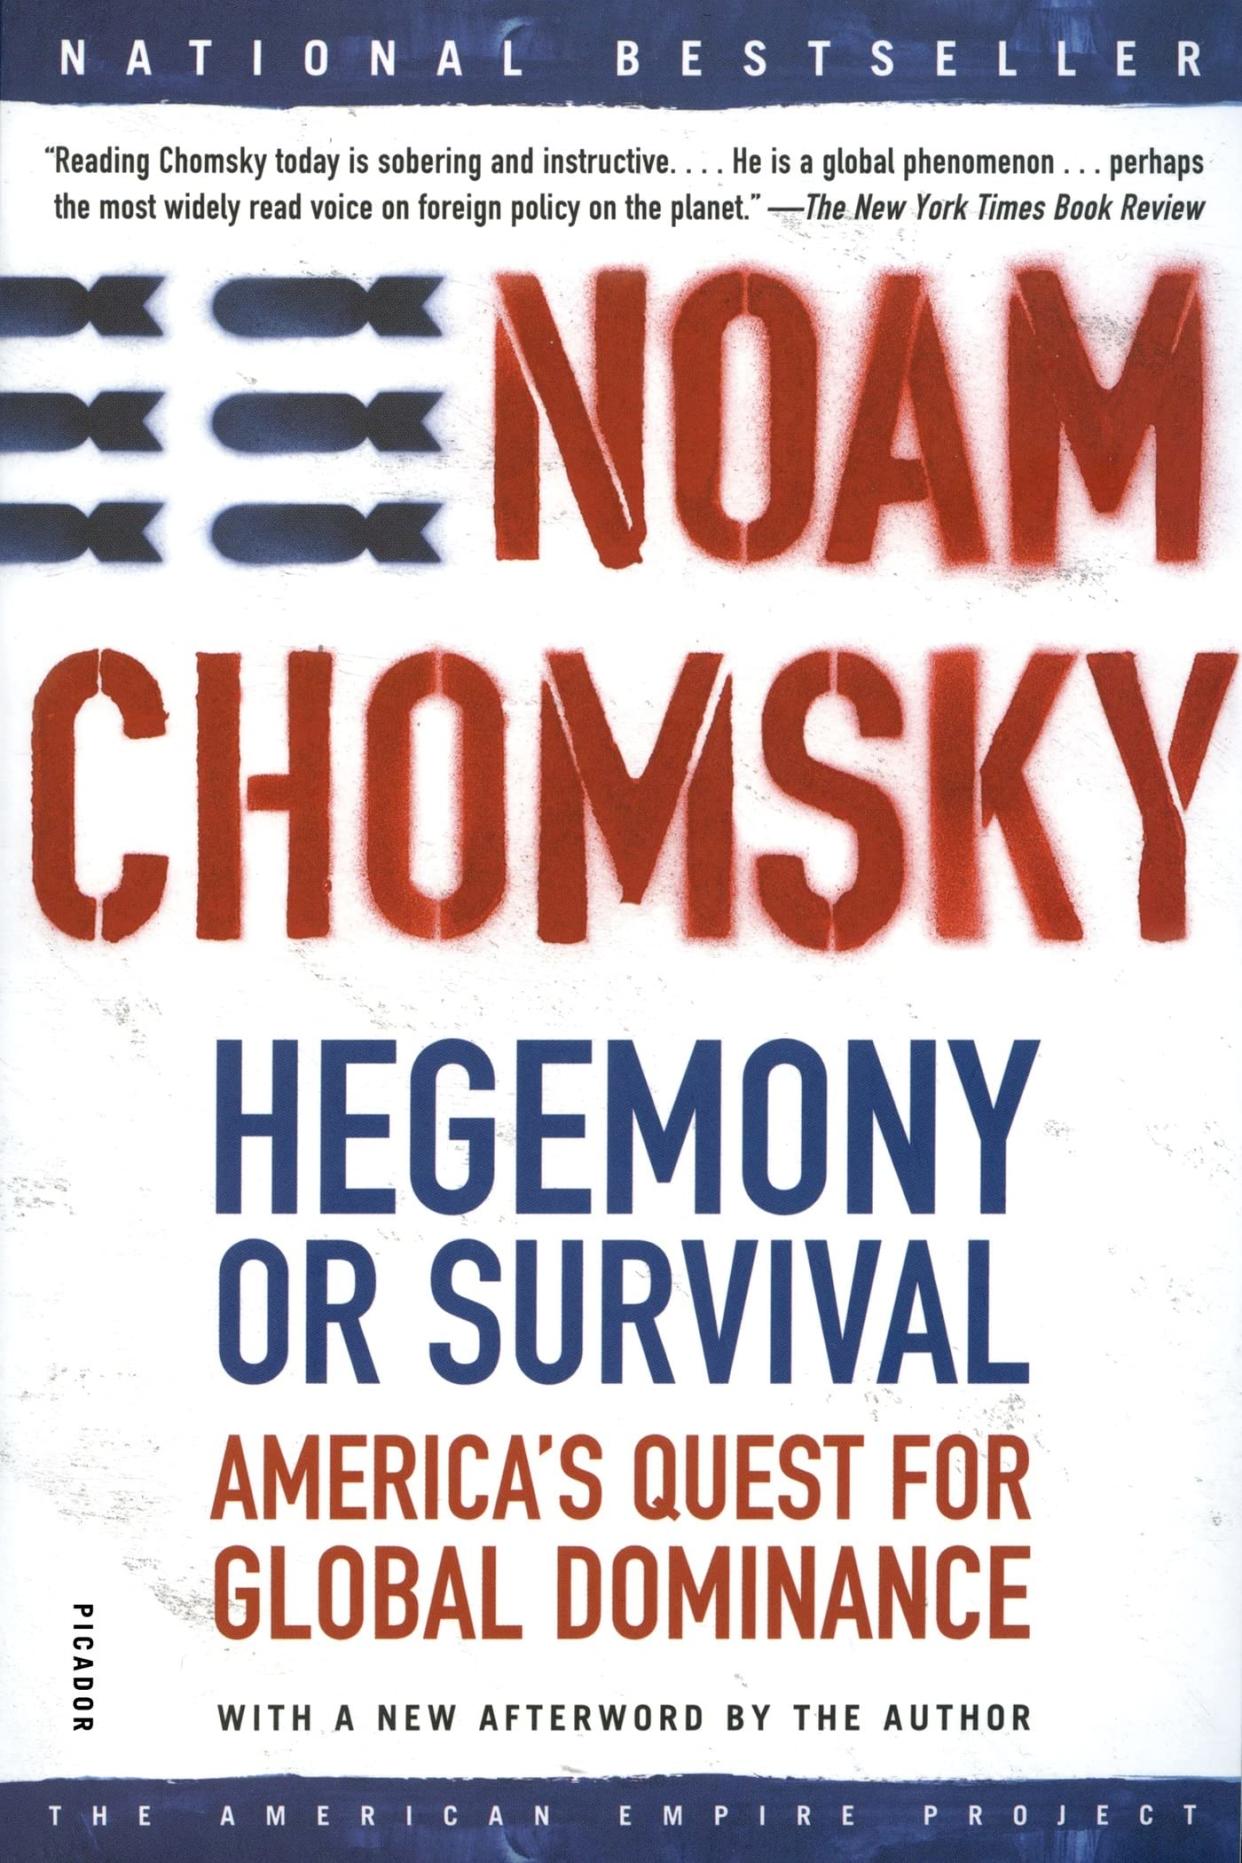 "Hegemony or Survival: America's Quest for Global Dominance" and other writings by Noam Chomsky